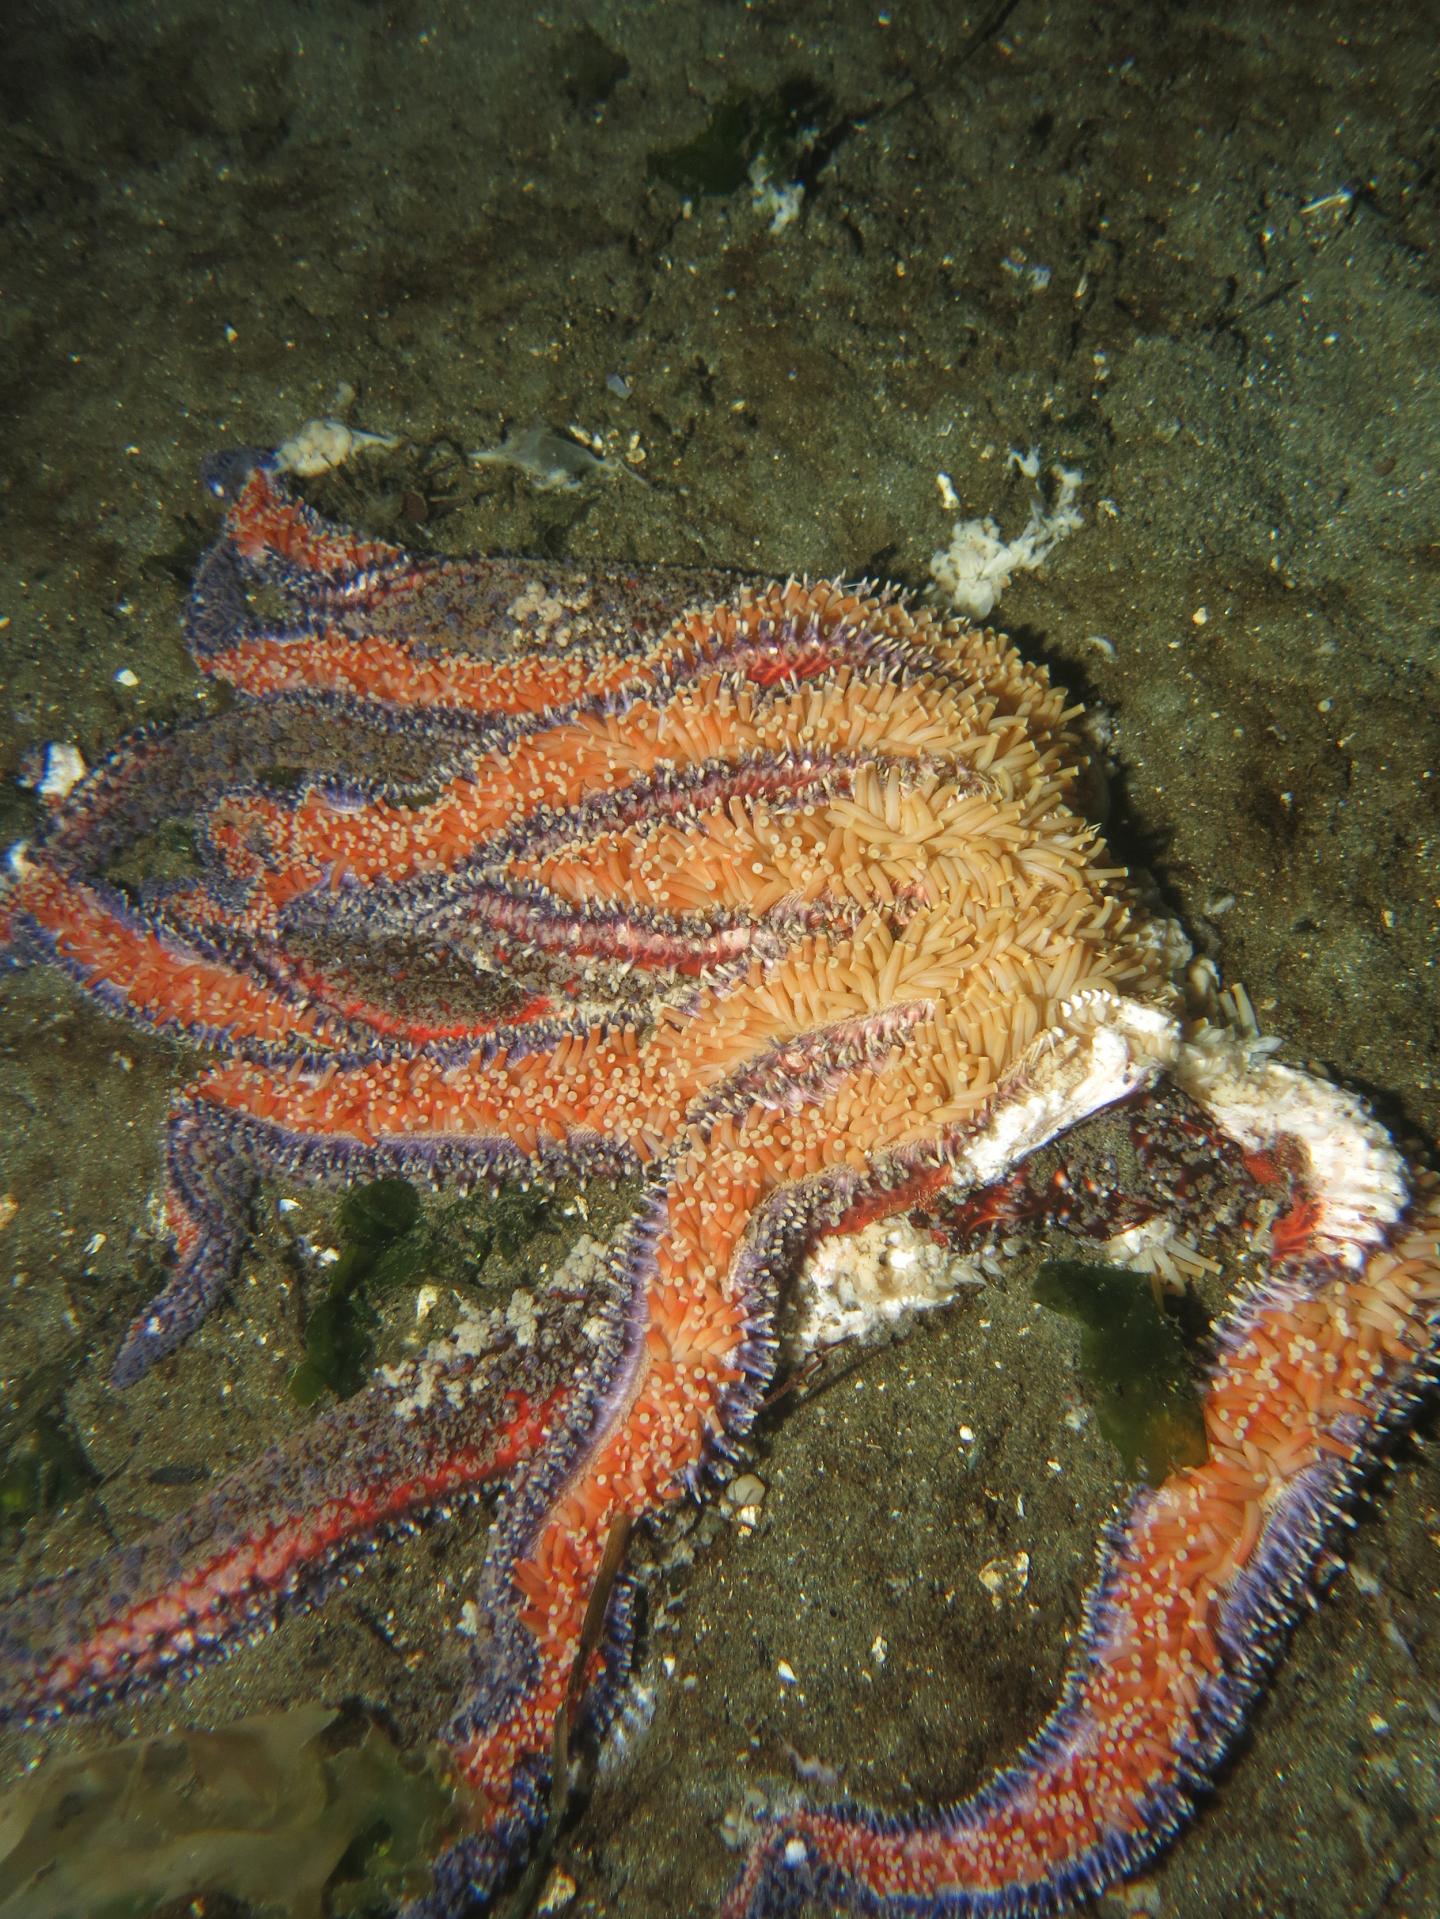 Key Sea Star Predator Wiped Out by Disease and Abnormally Warm Waters